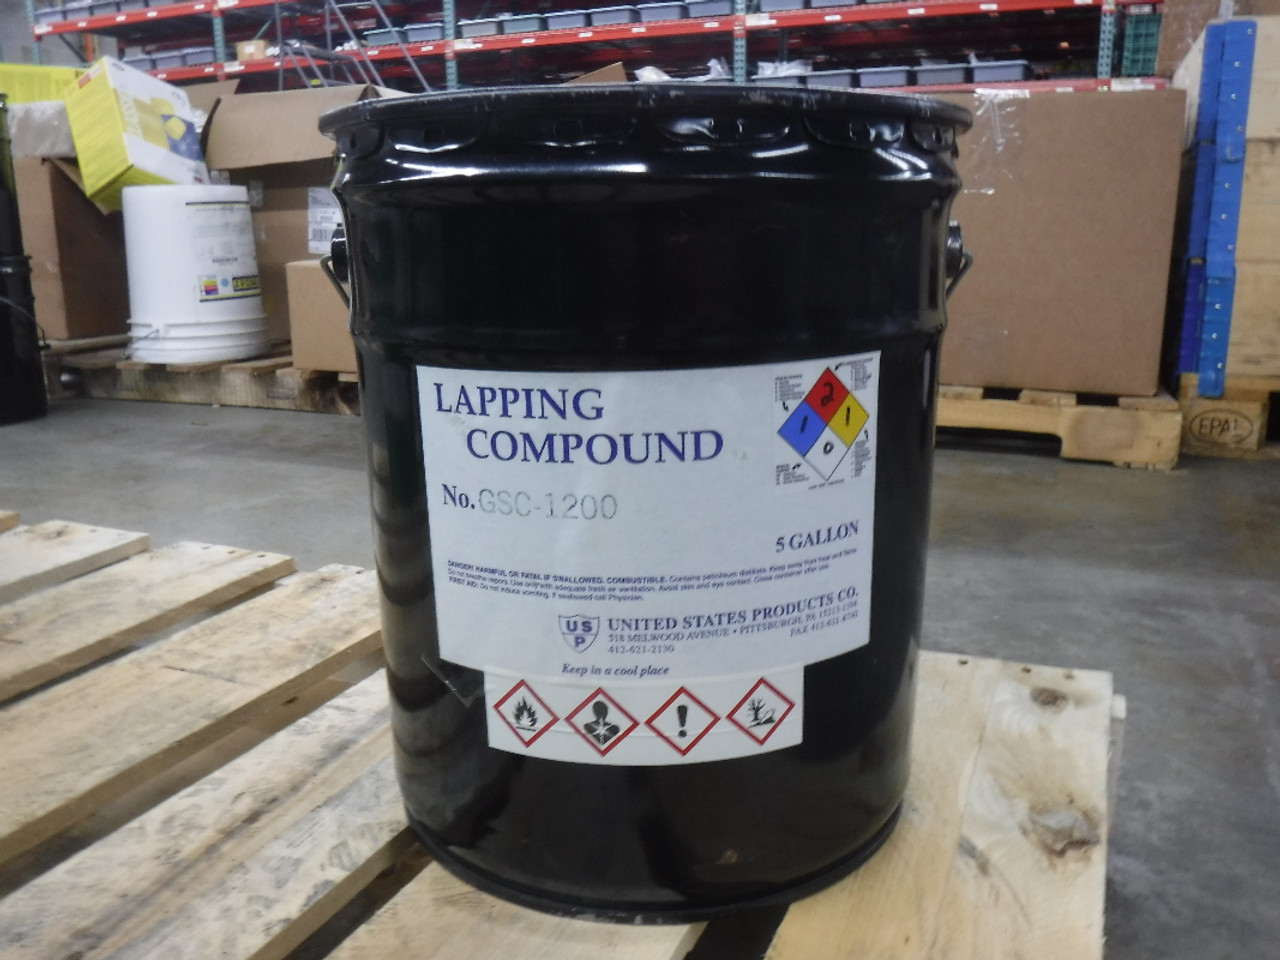 UNITED STATES PRODUCTS CO. Crystolon Lapping Compound 5 Gallon GSC